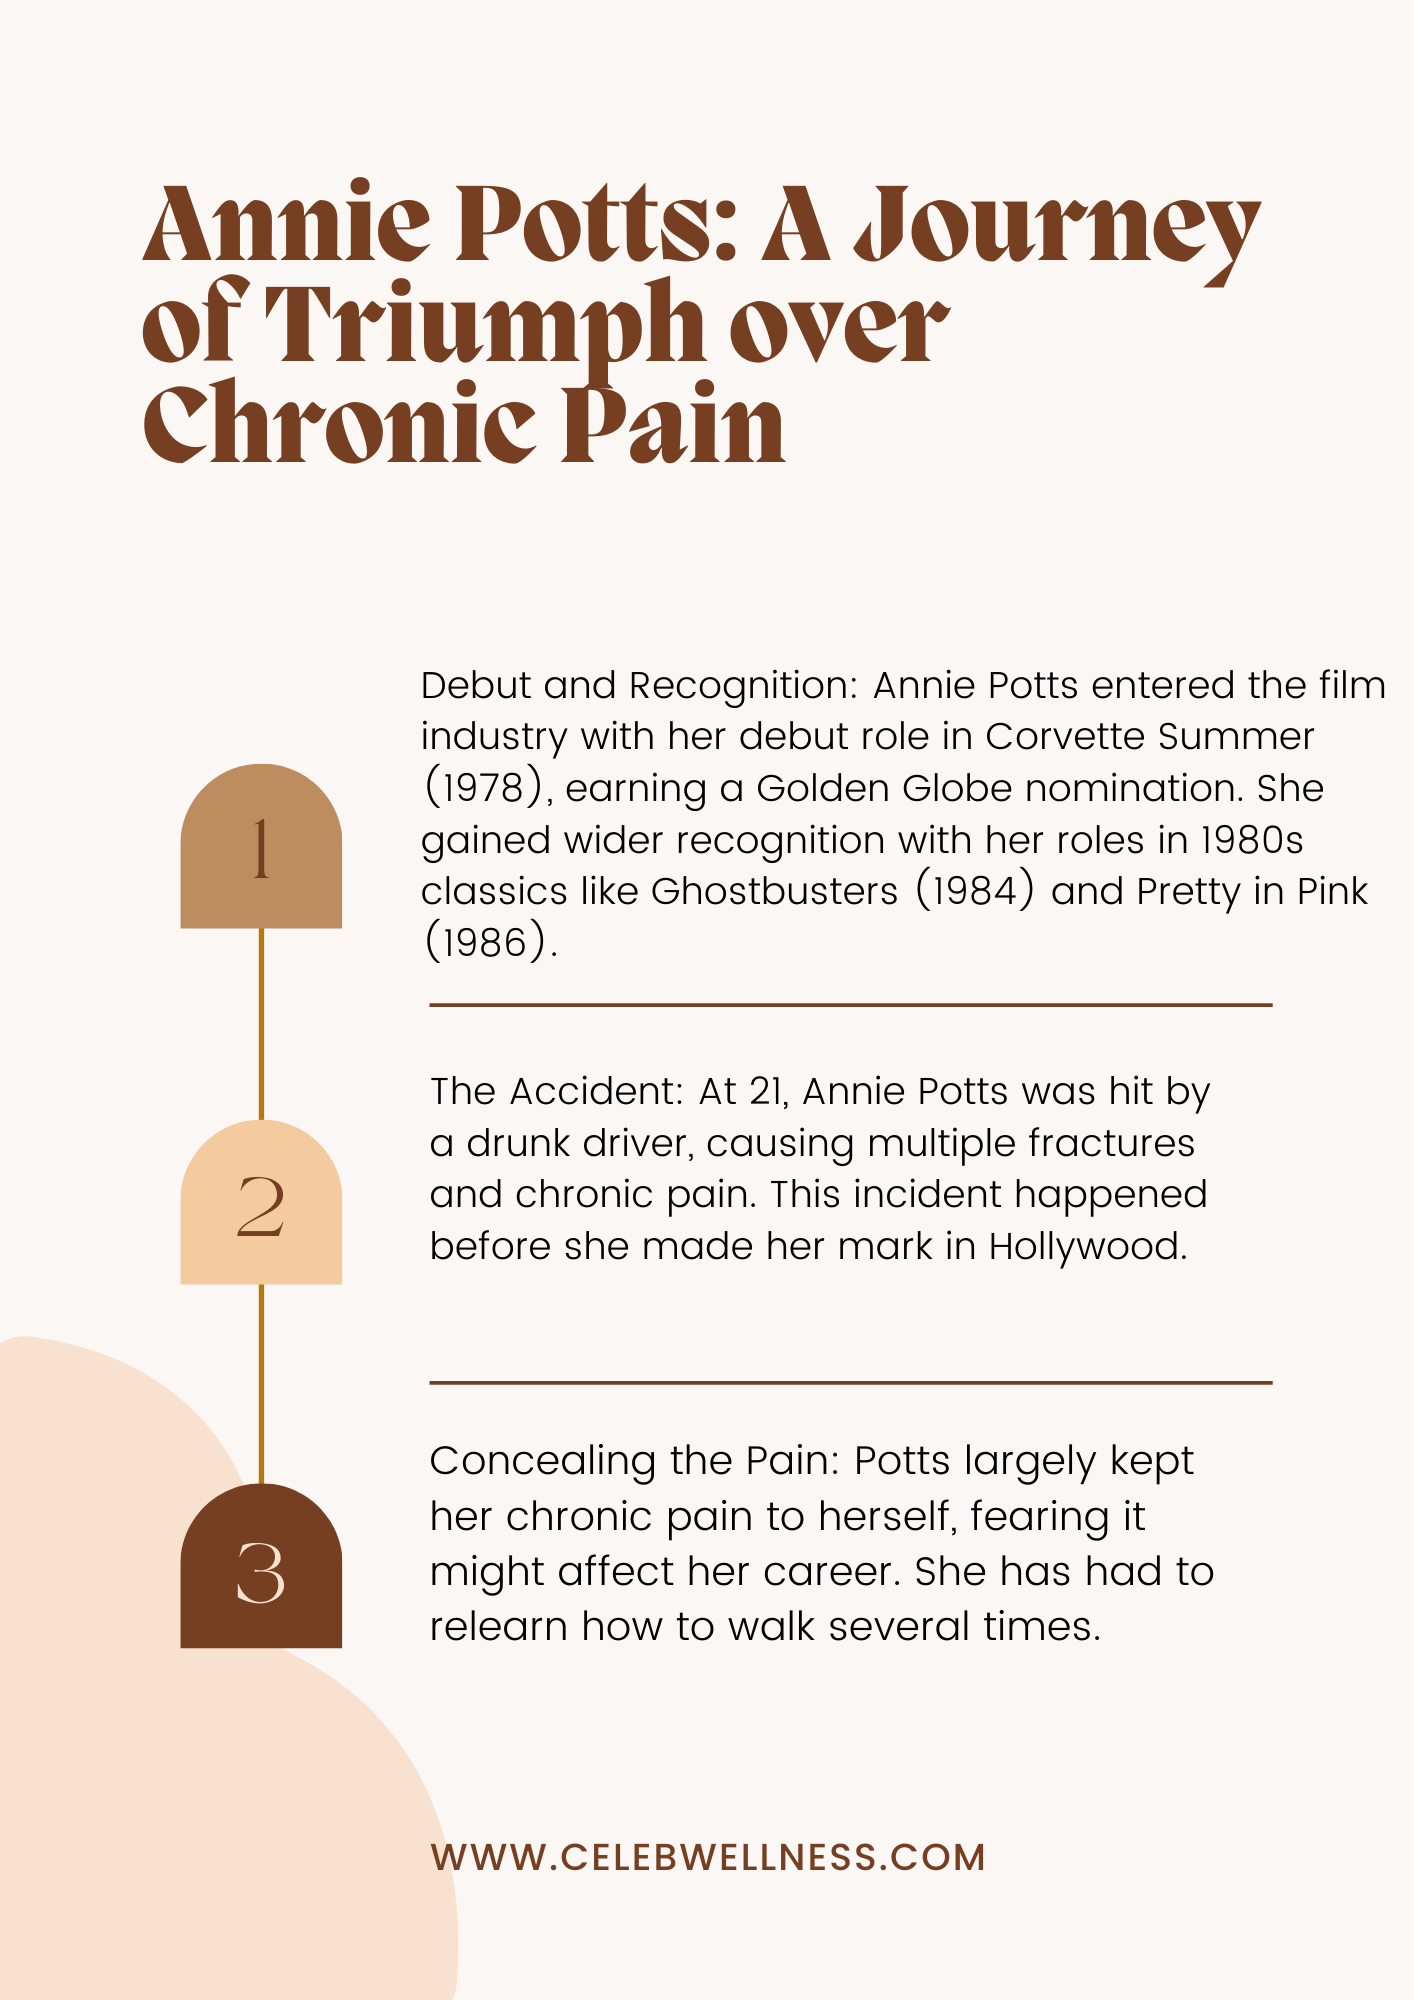 An infographic illustration of Annie Potts: A Journey of Triumph over Chronic Pain